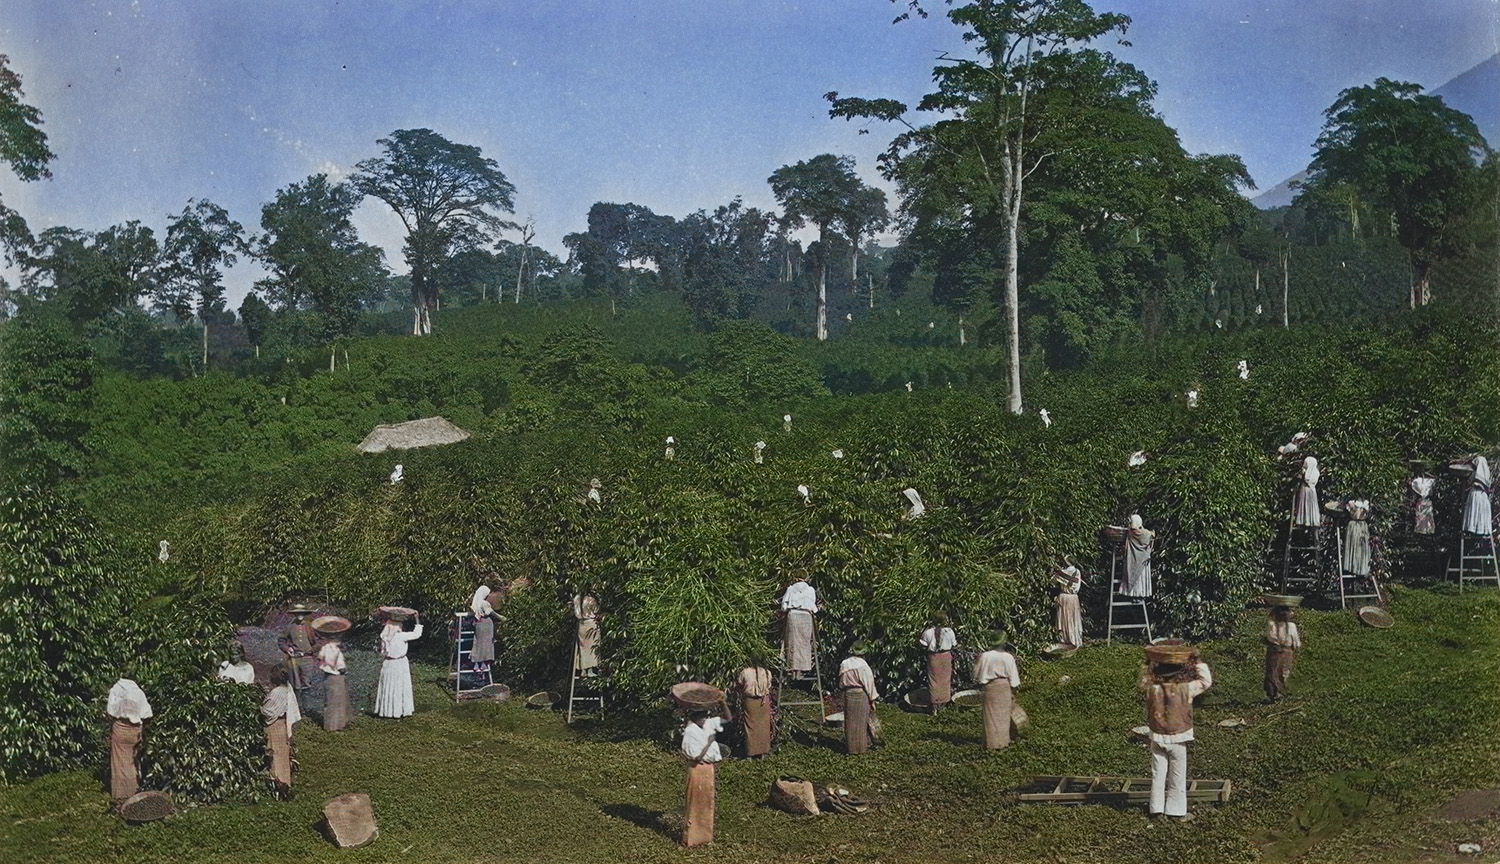 Women and men, some with baskets of berries on their heads, harvest coffee from lush rows of trees, taller shade trees are visible in the background.